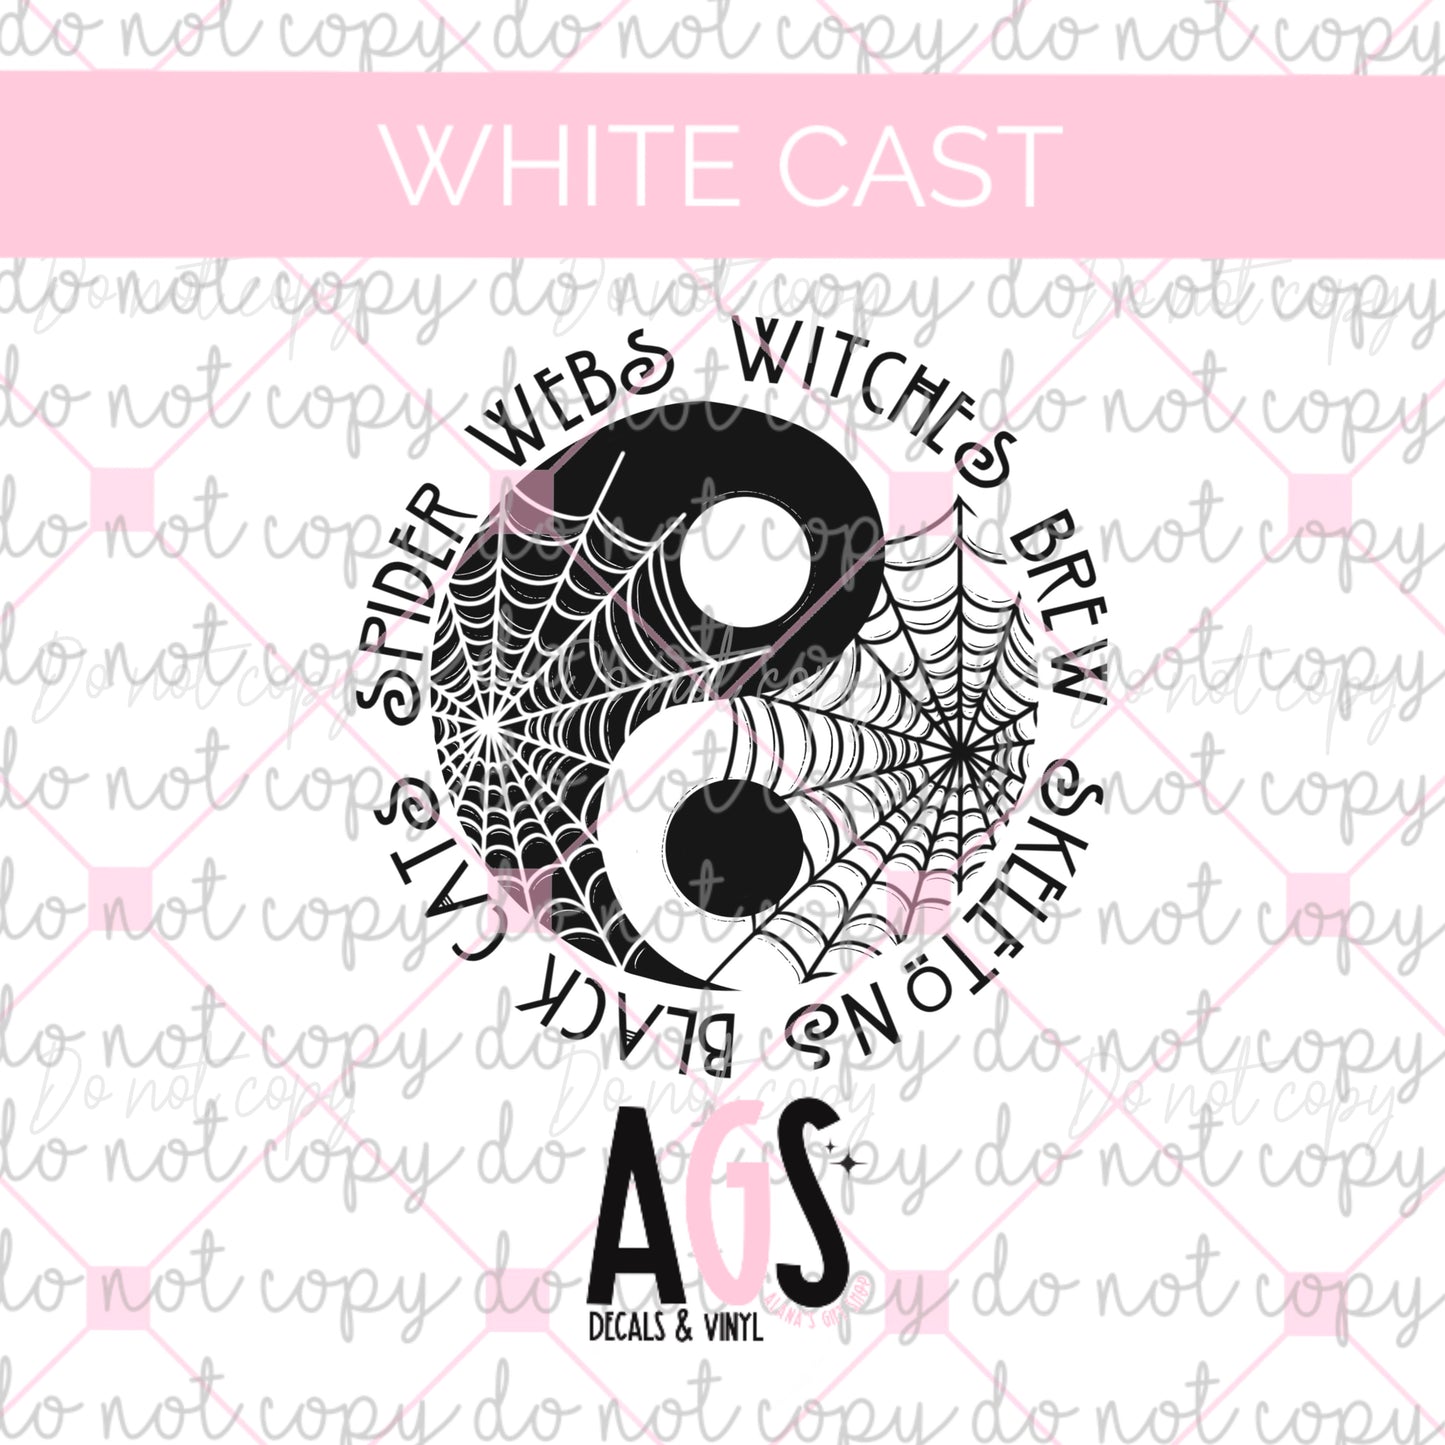 WC-596 Spider Webs Witches Brew Ying Yang